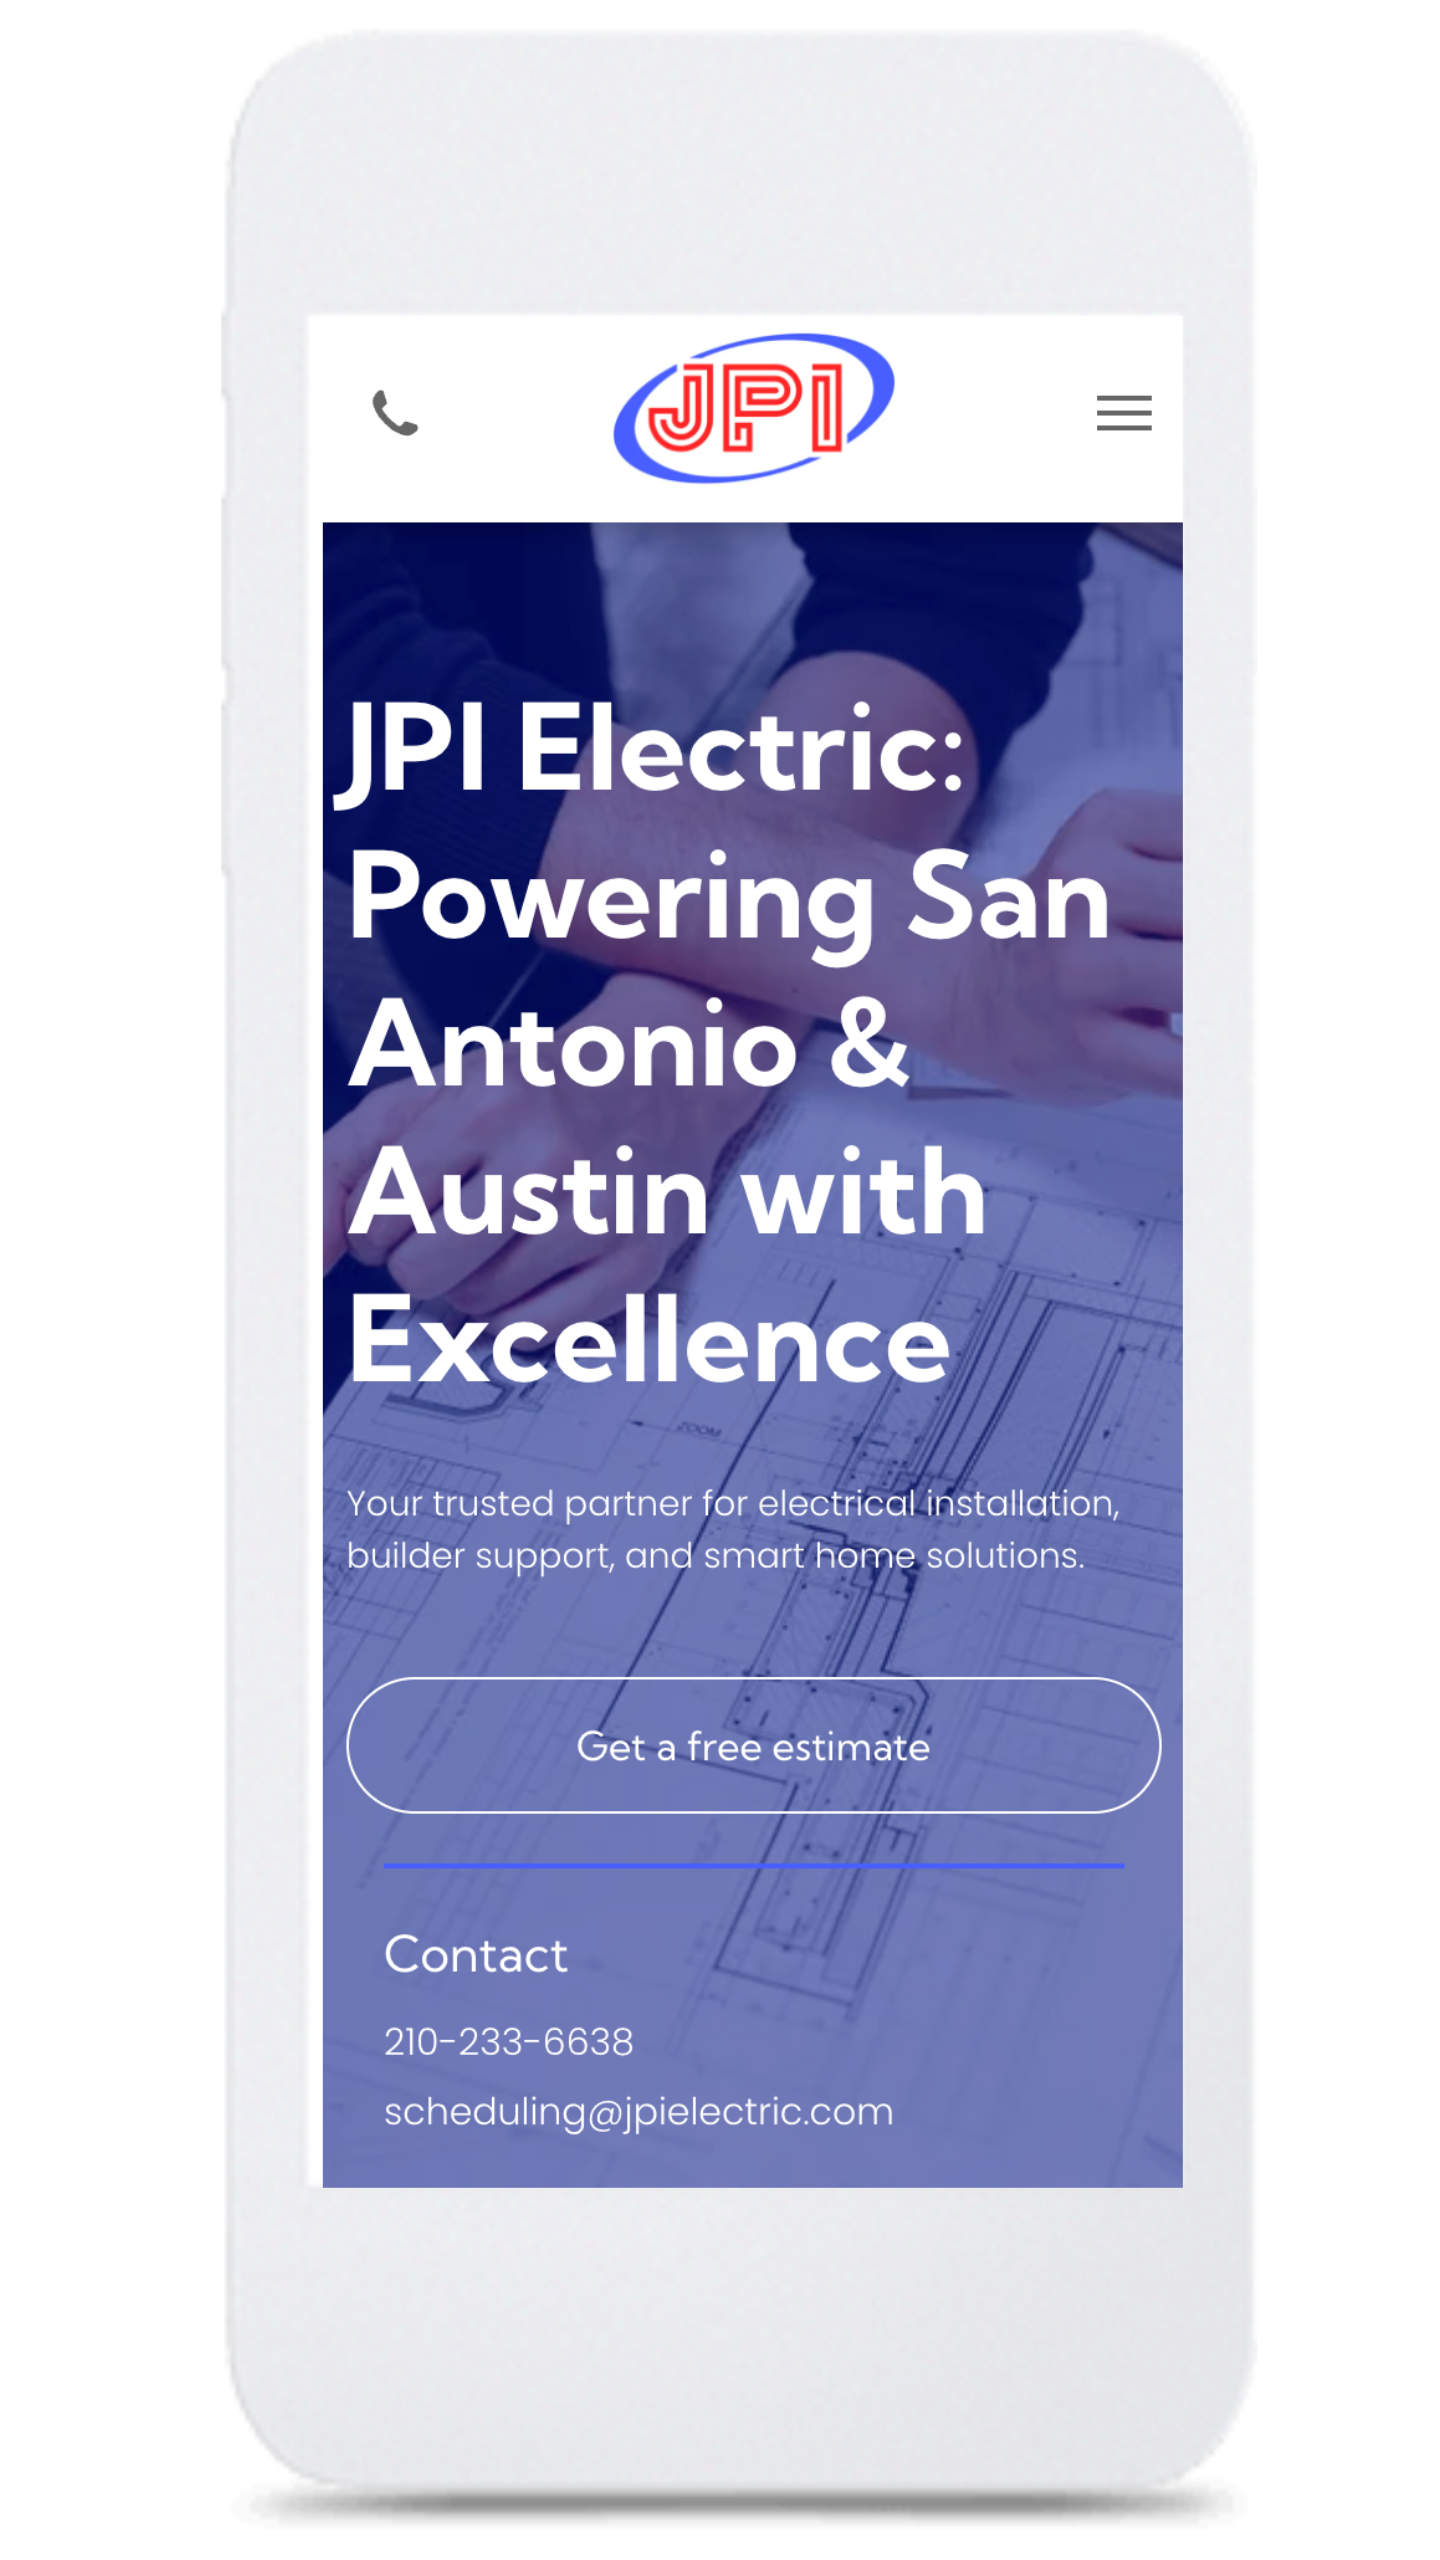 Jpi electric is powering san antonio and austin with excellence